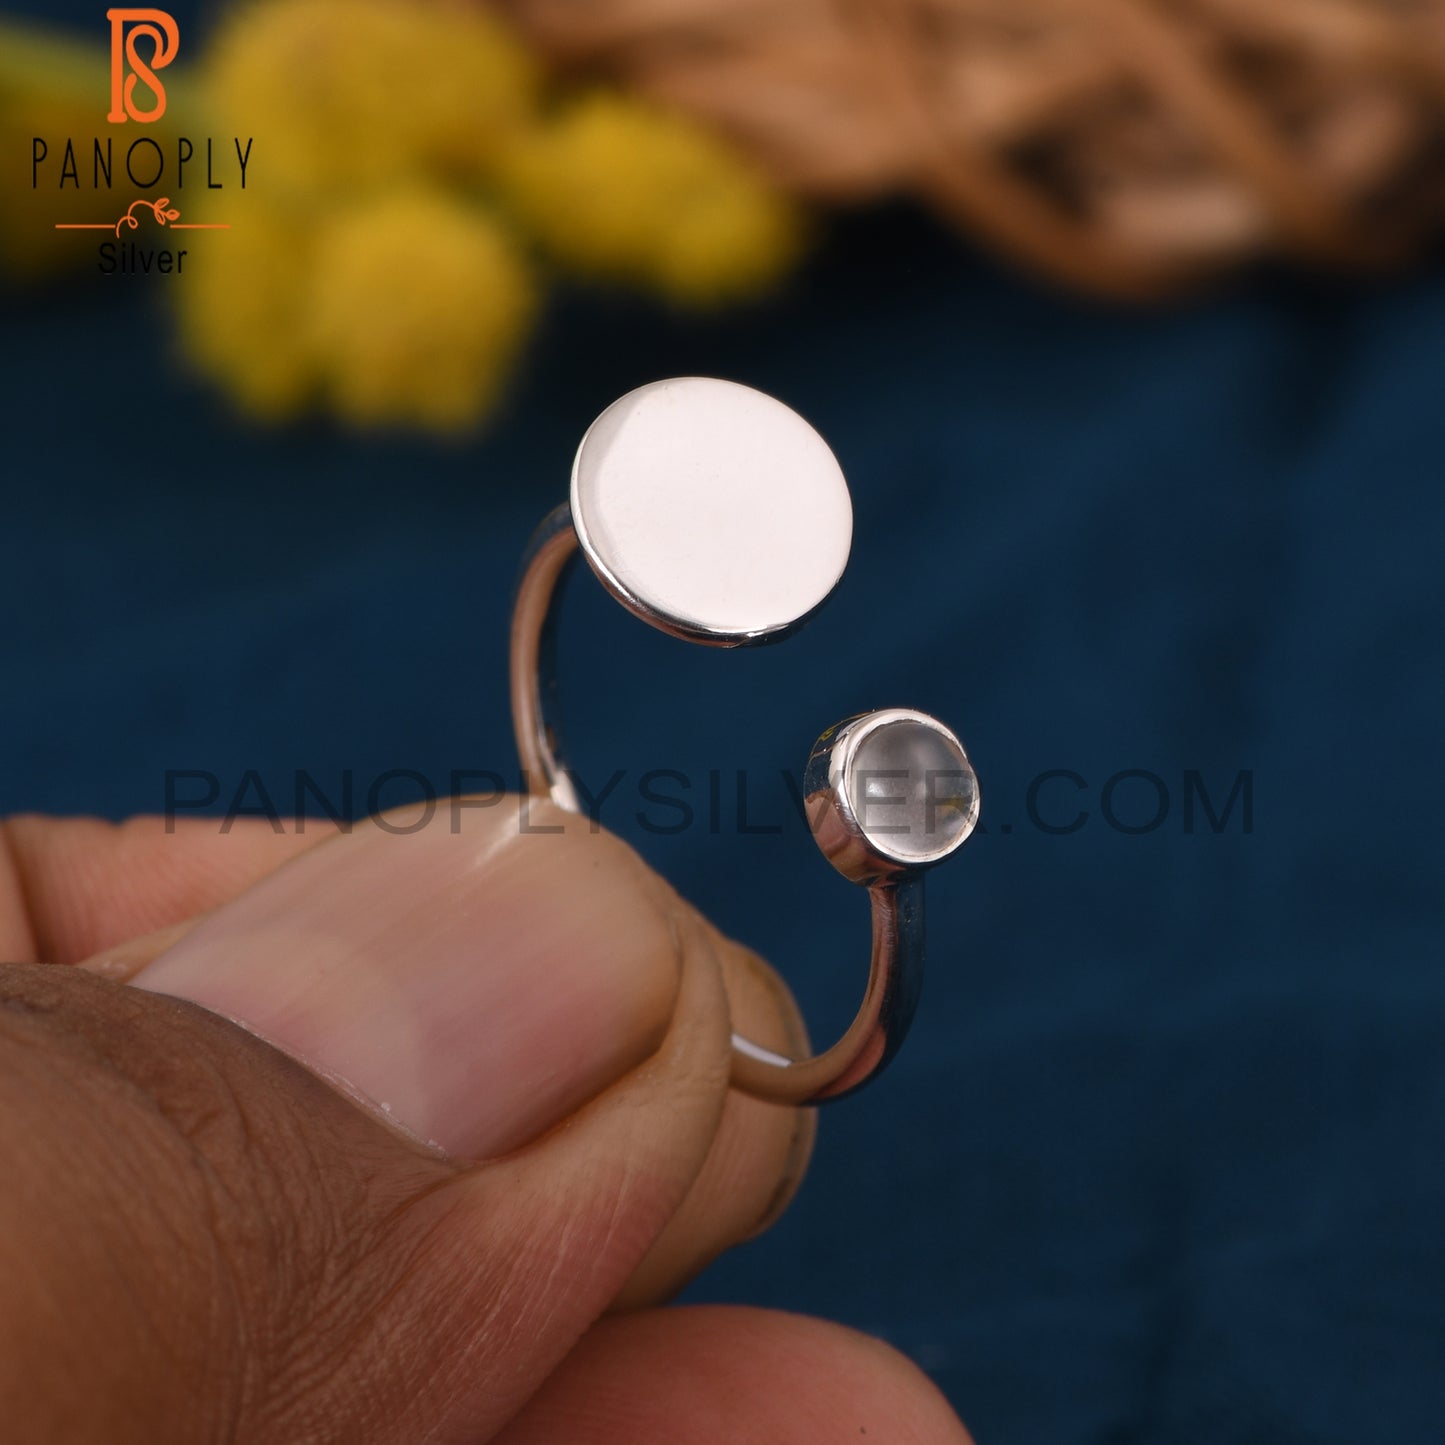 925 Silver Crystal Quartz Adjustable Rings Initial Jewelry